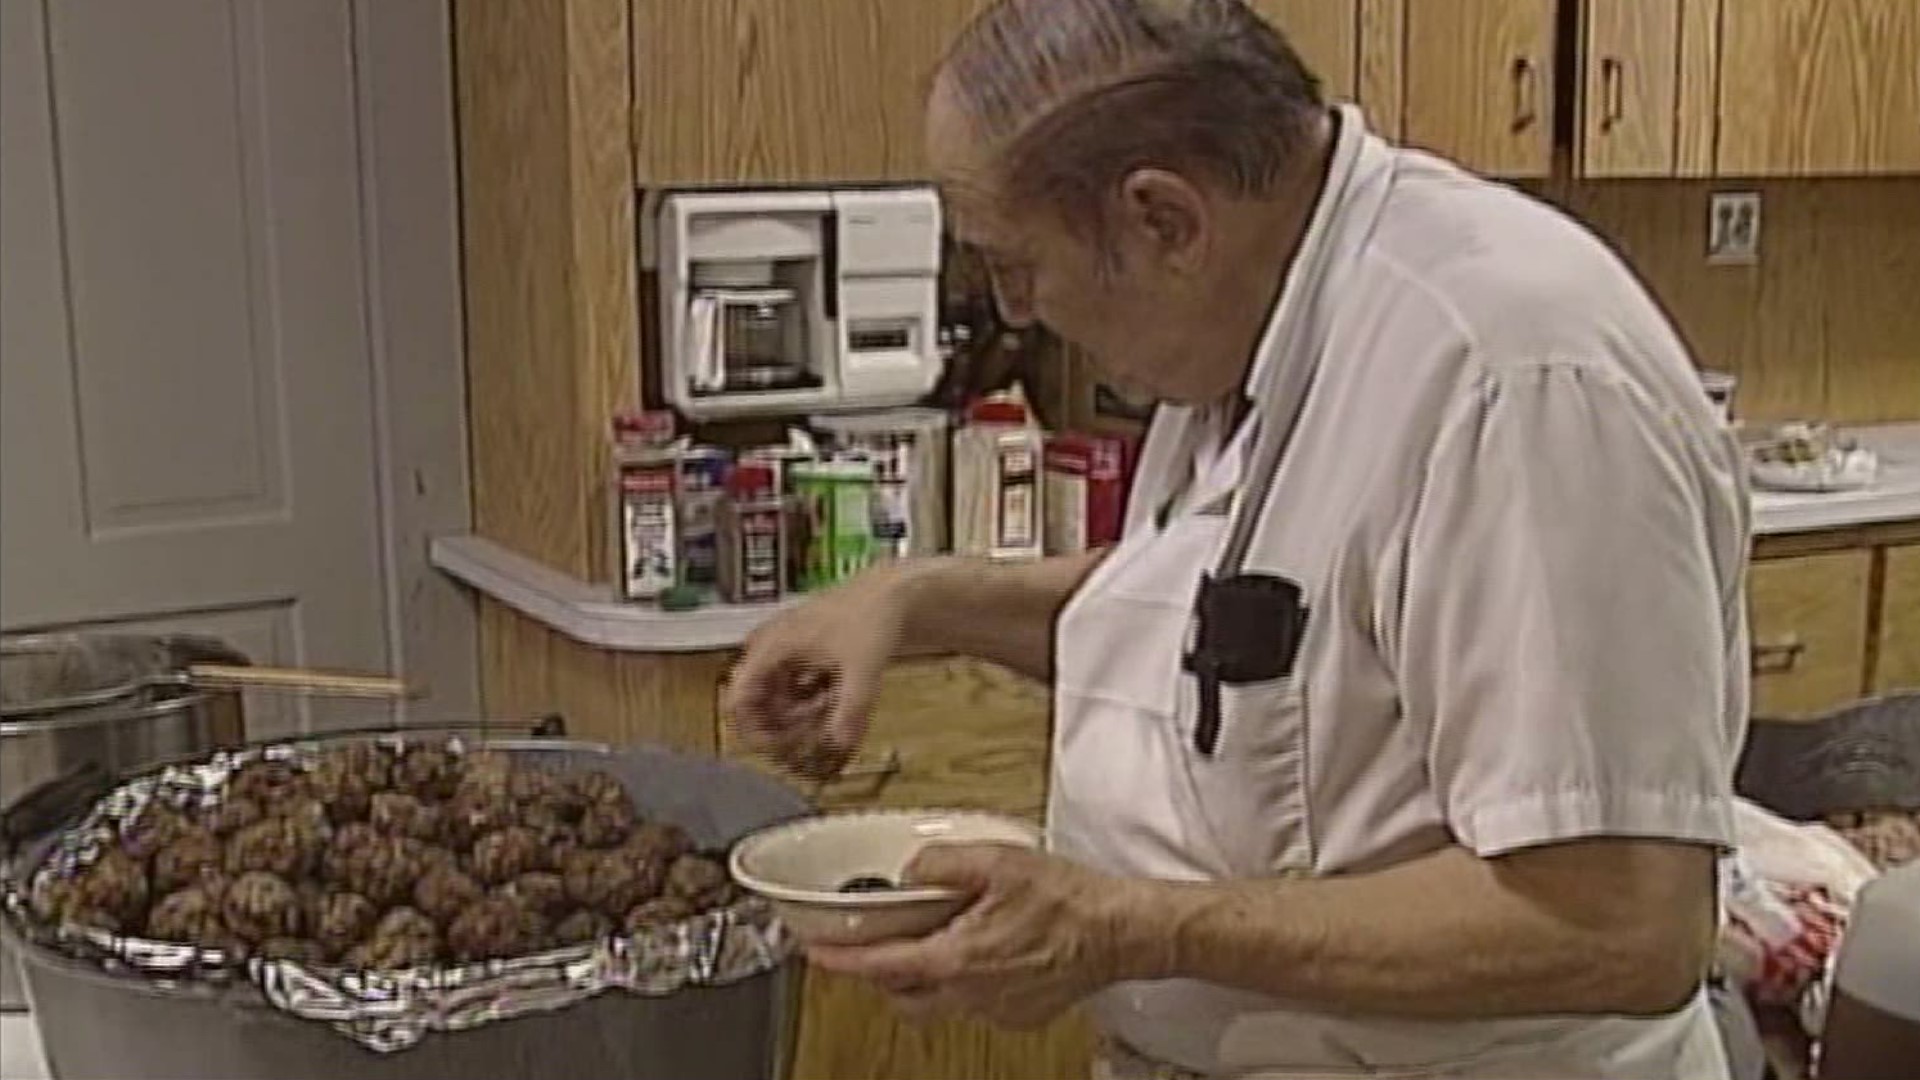 Mike Stevens meets "The Meatball Man" is this tasty trip Back Down The Pennsylvania Road.